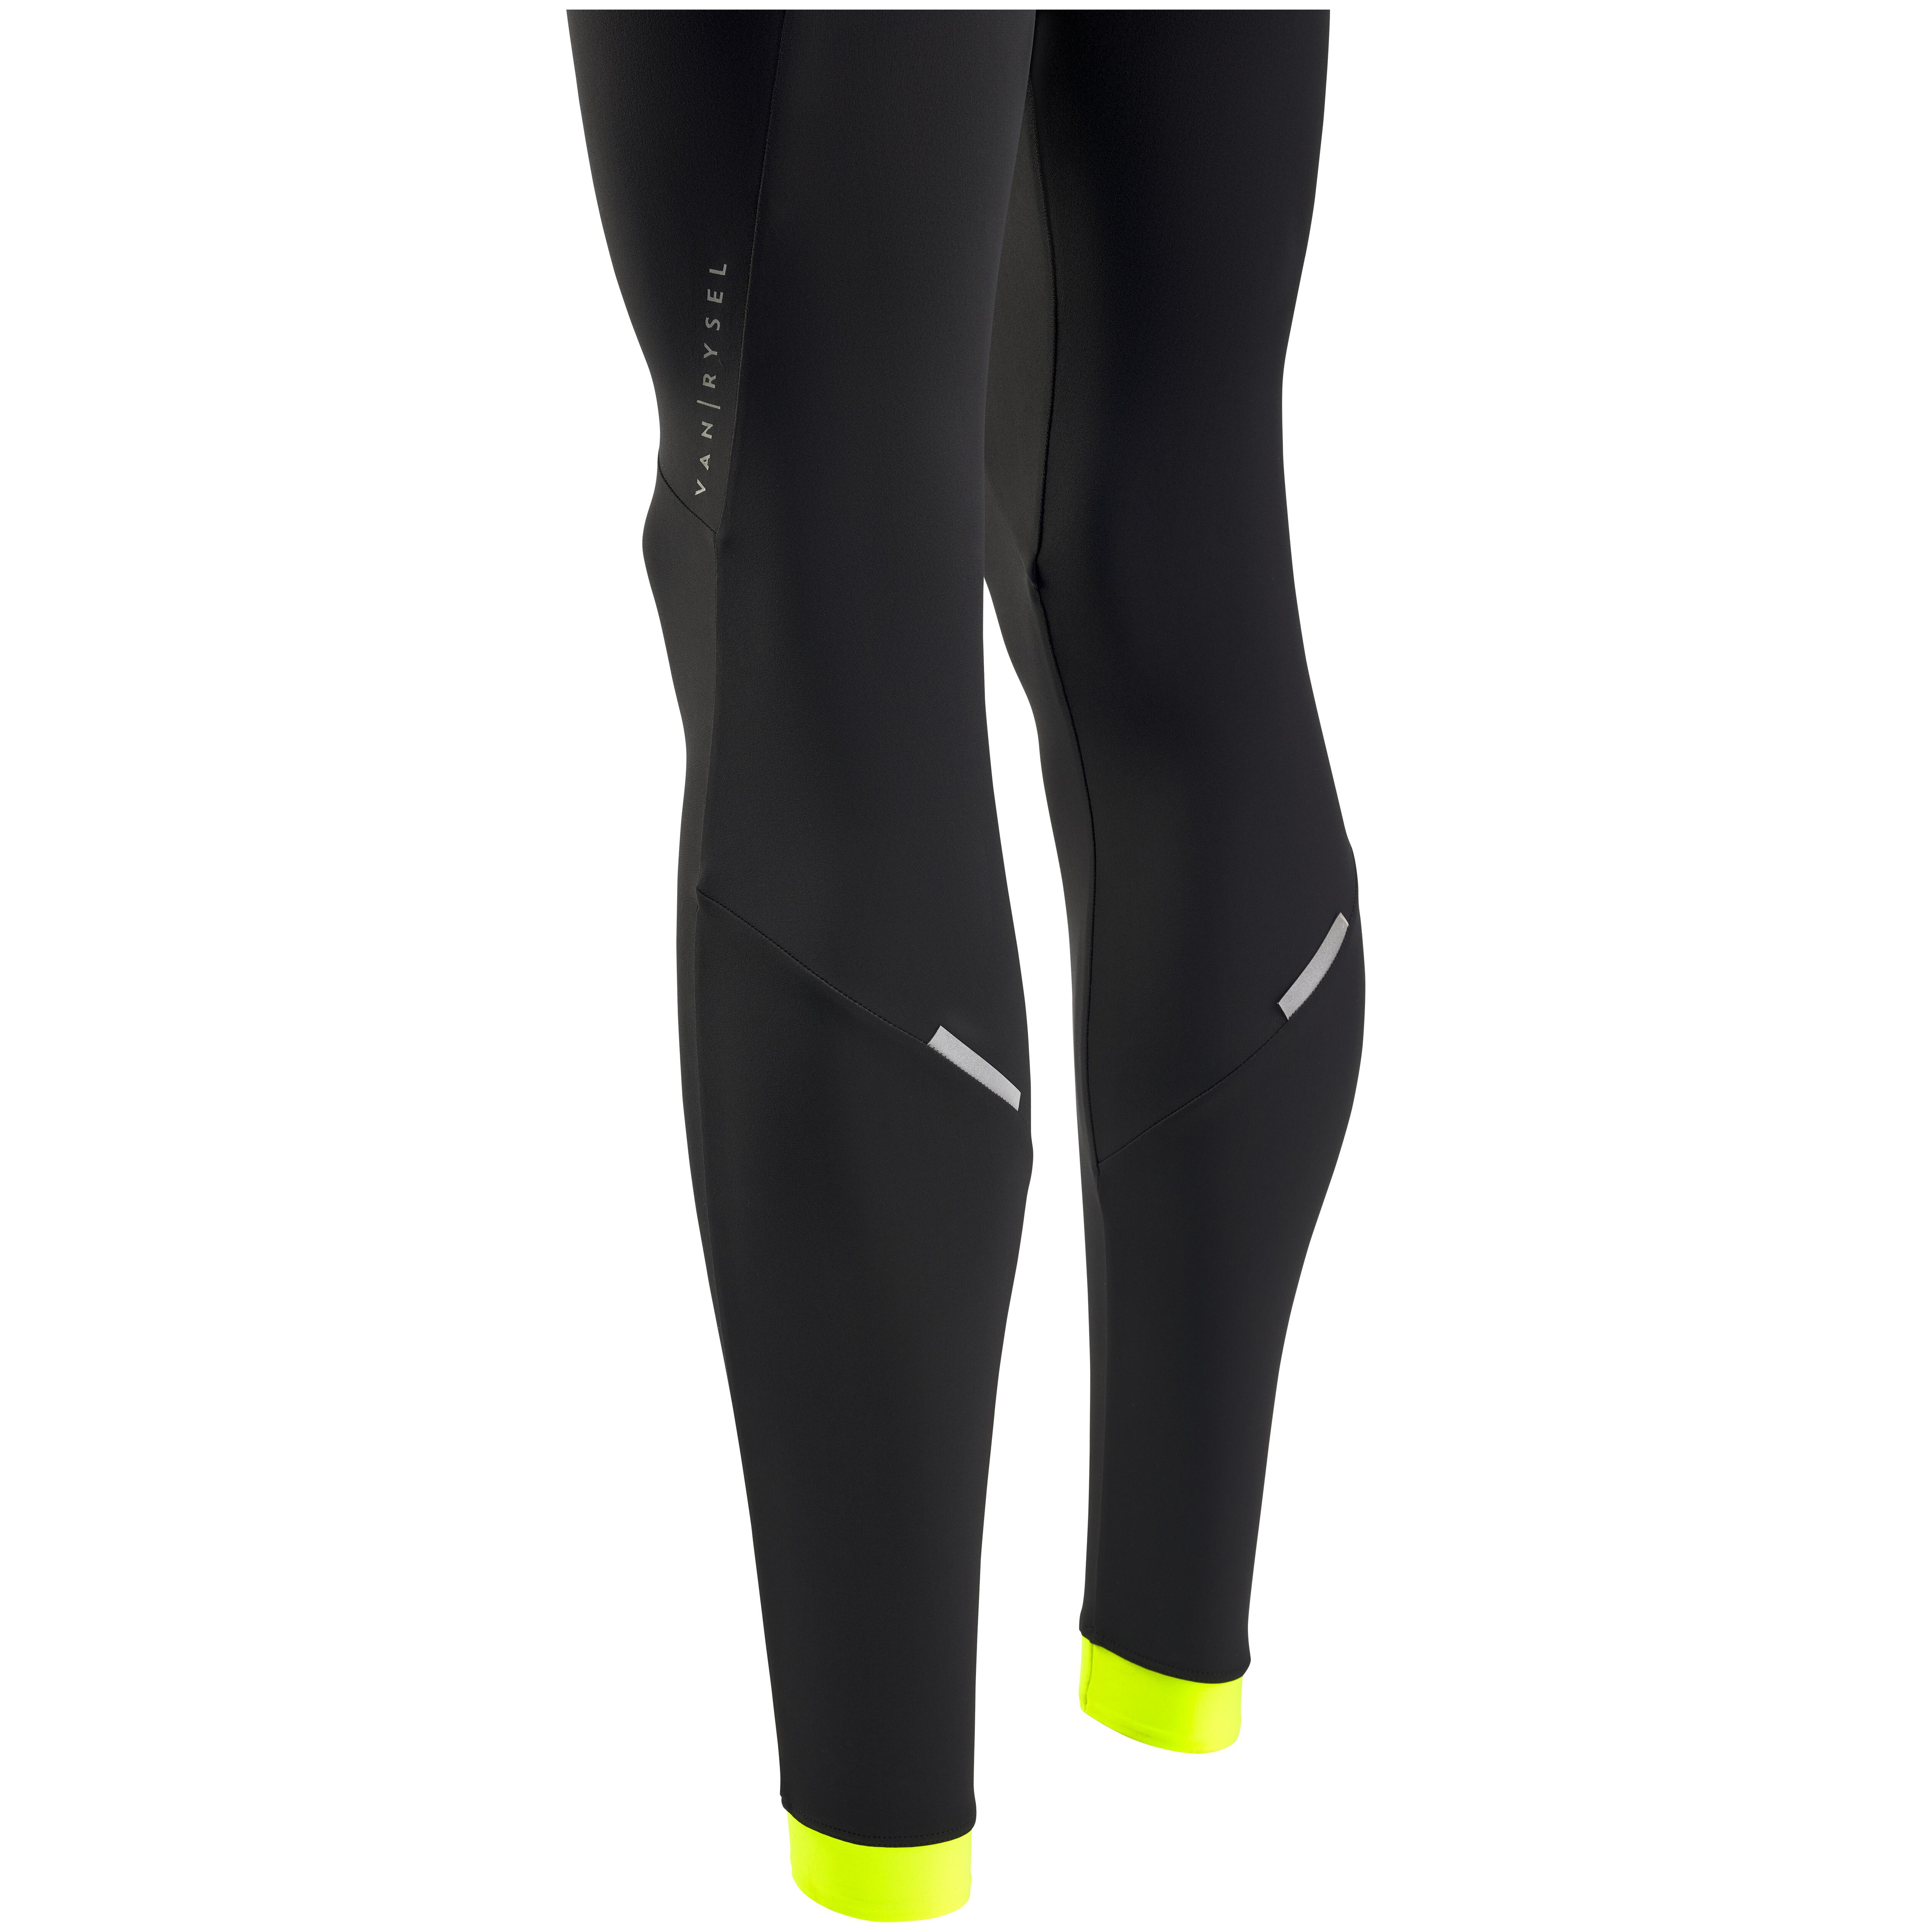 Men's Cycling Tights - RC 100 Black - Black, Fluo lime yellow